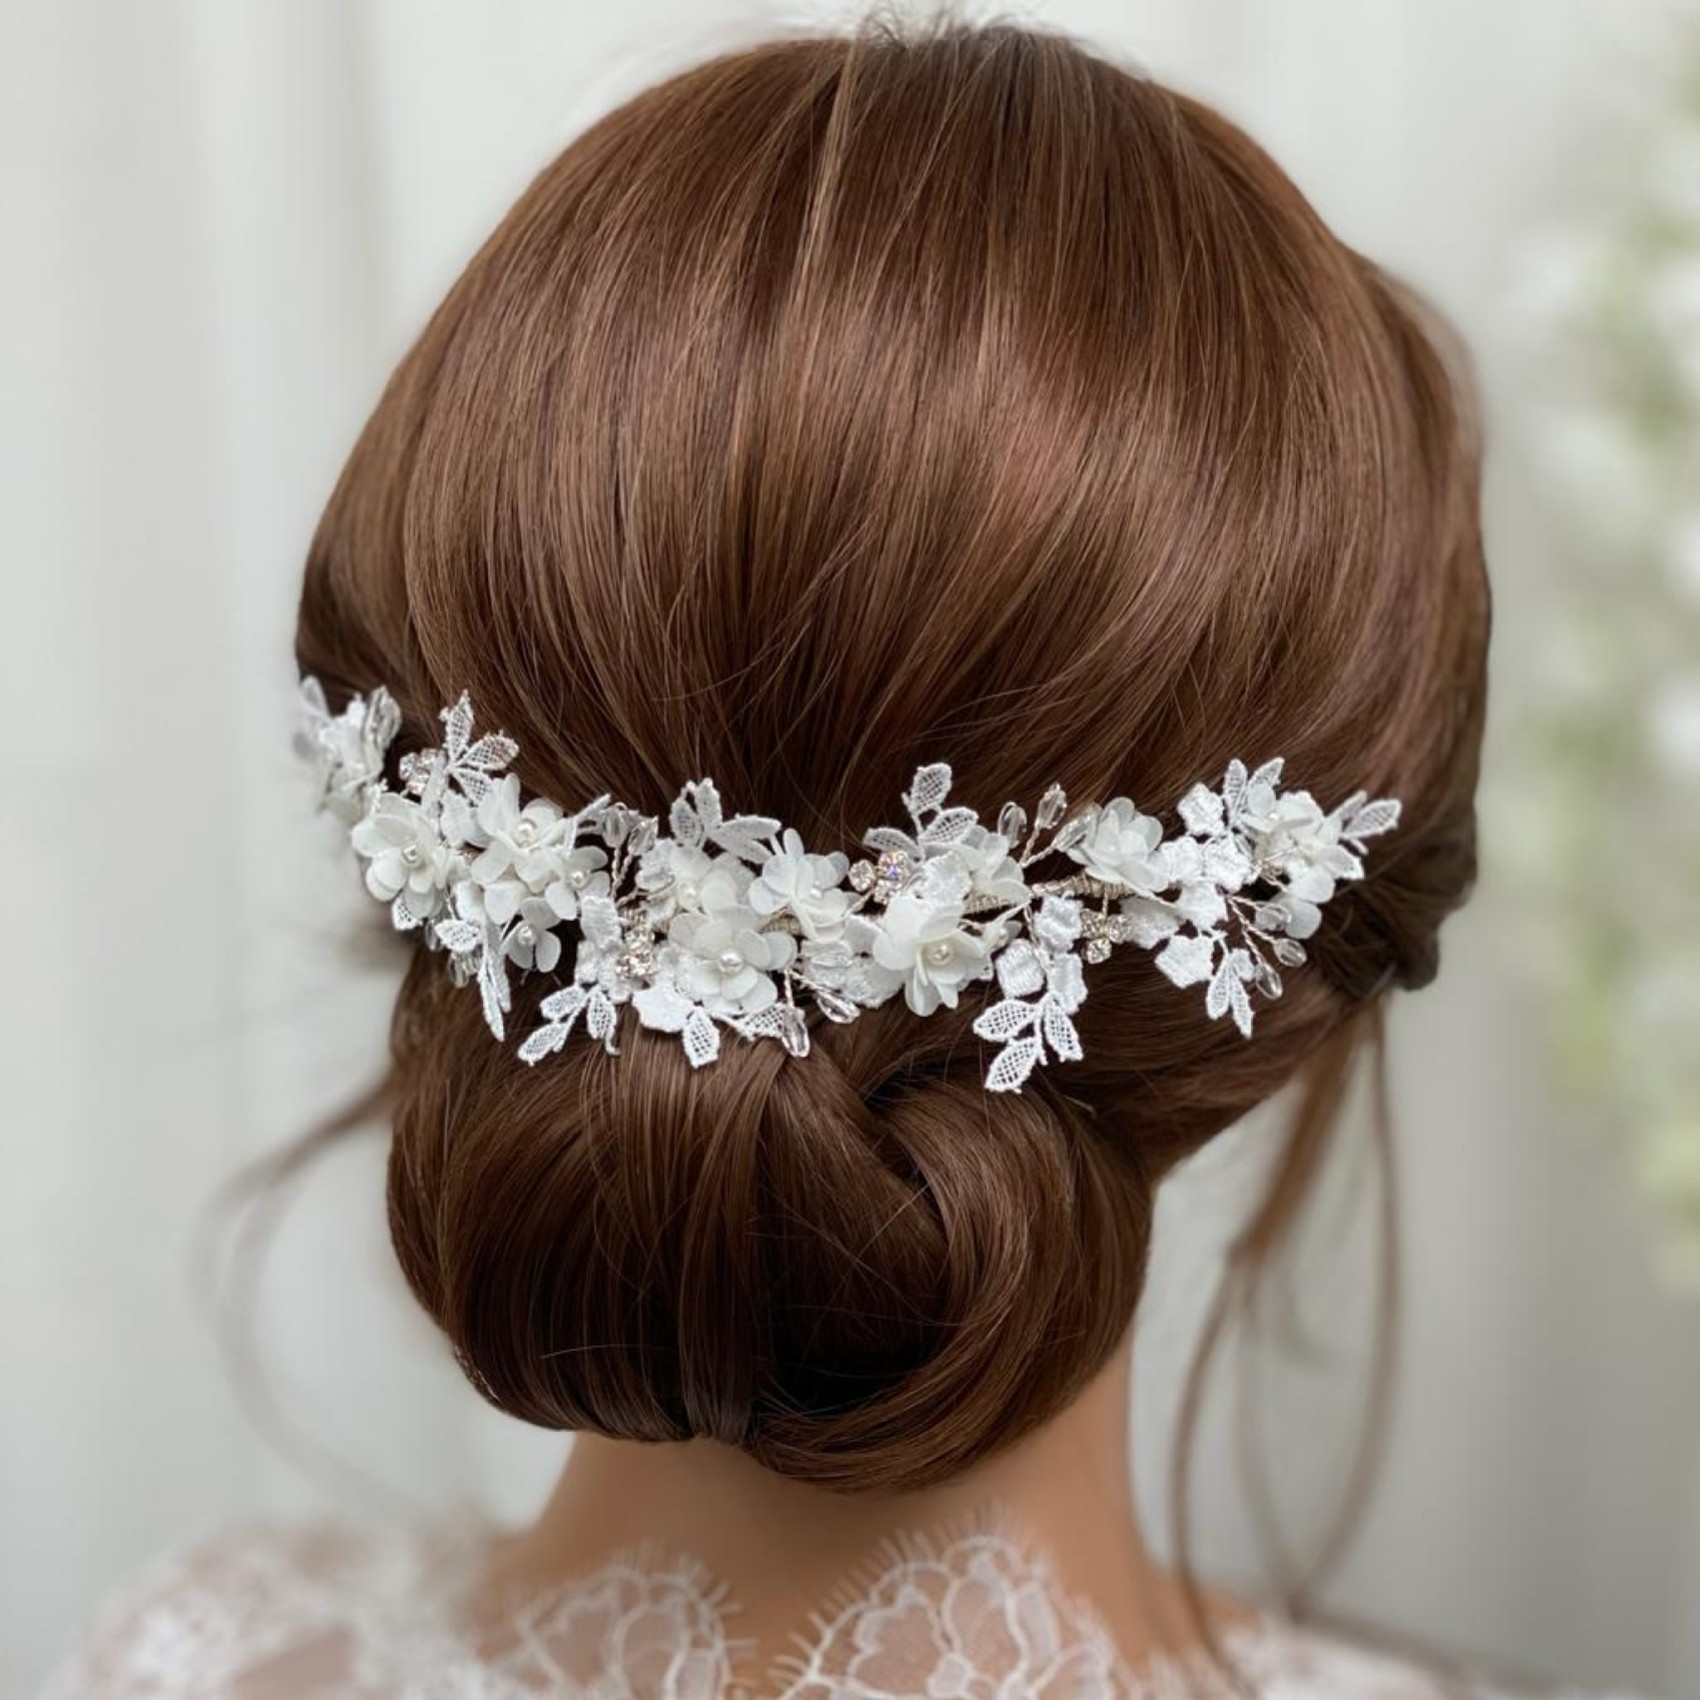 Boho bridal headpiece with lots of ivory flowers and lace